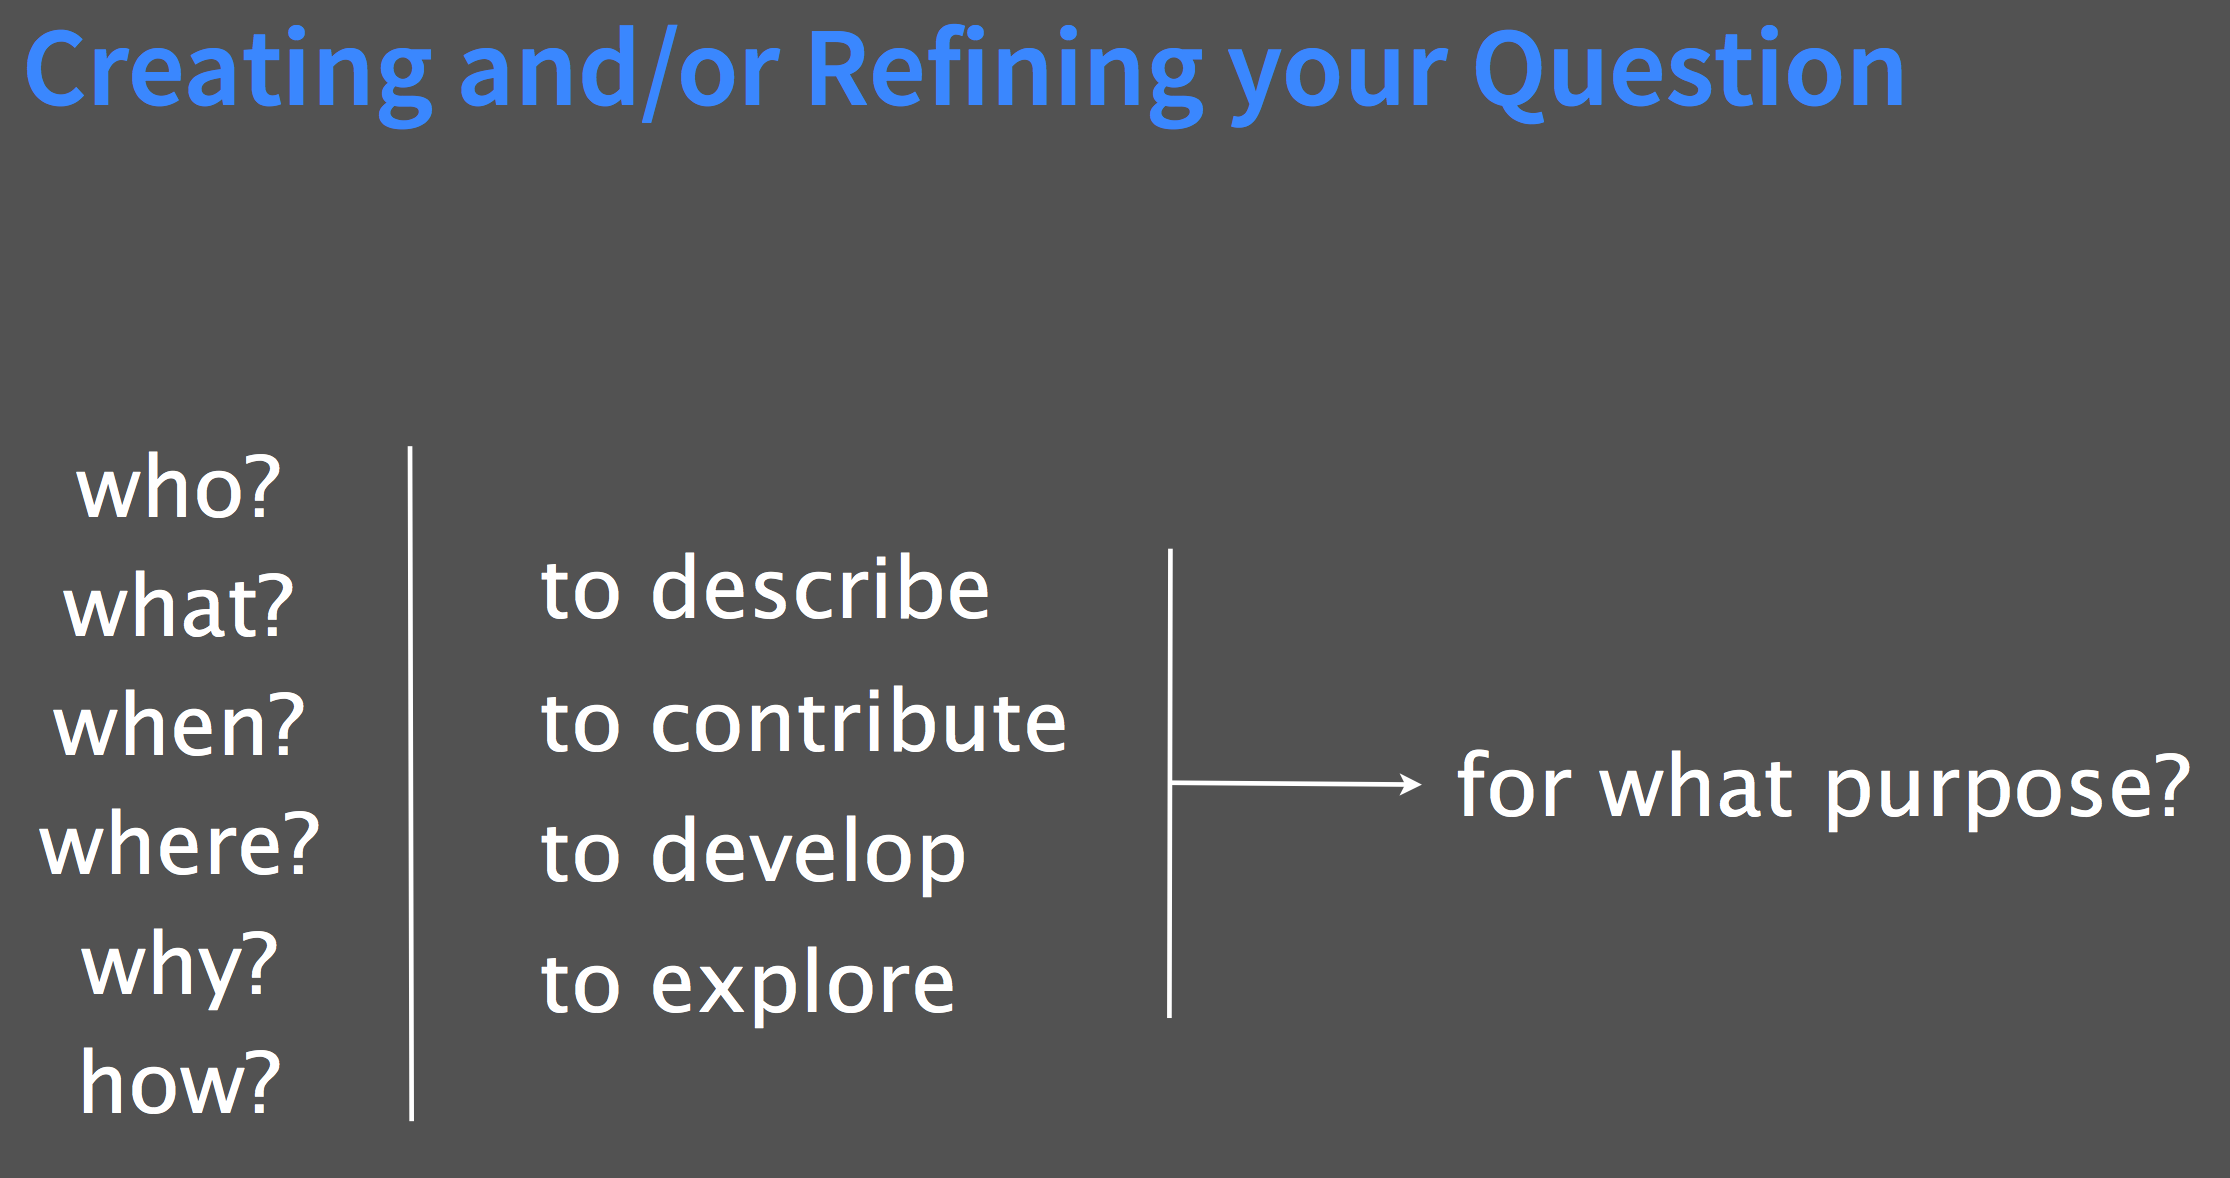 Creating and/or refining your research question, per DevDH.org